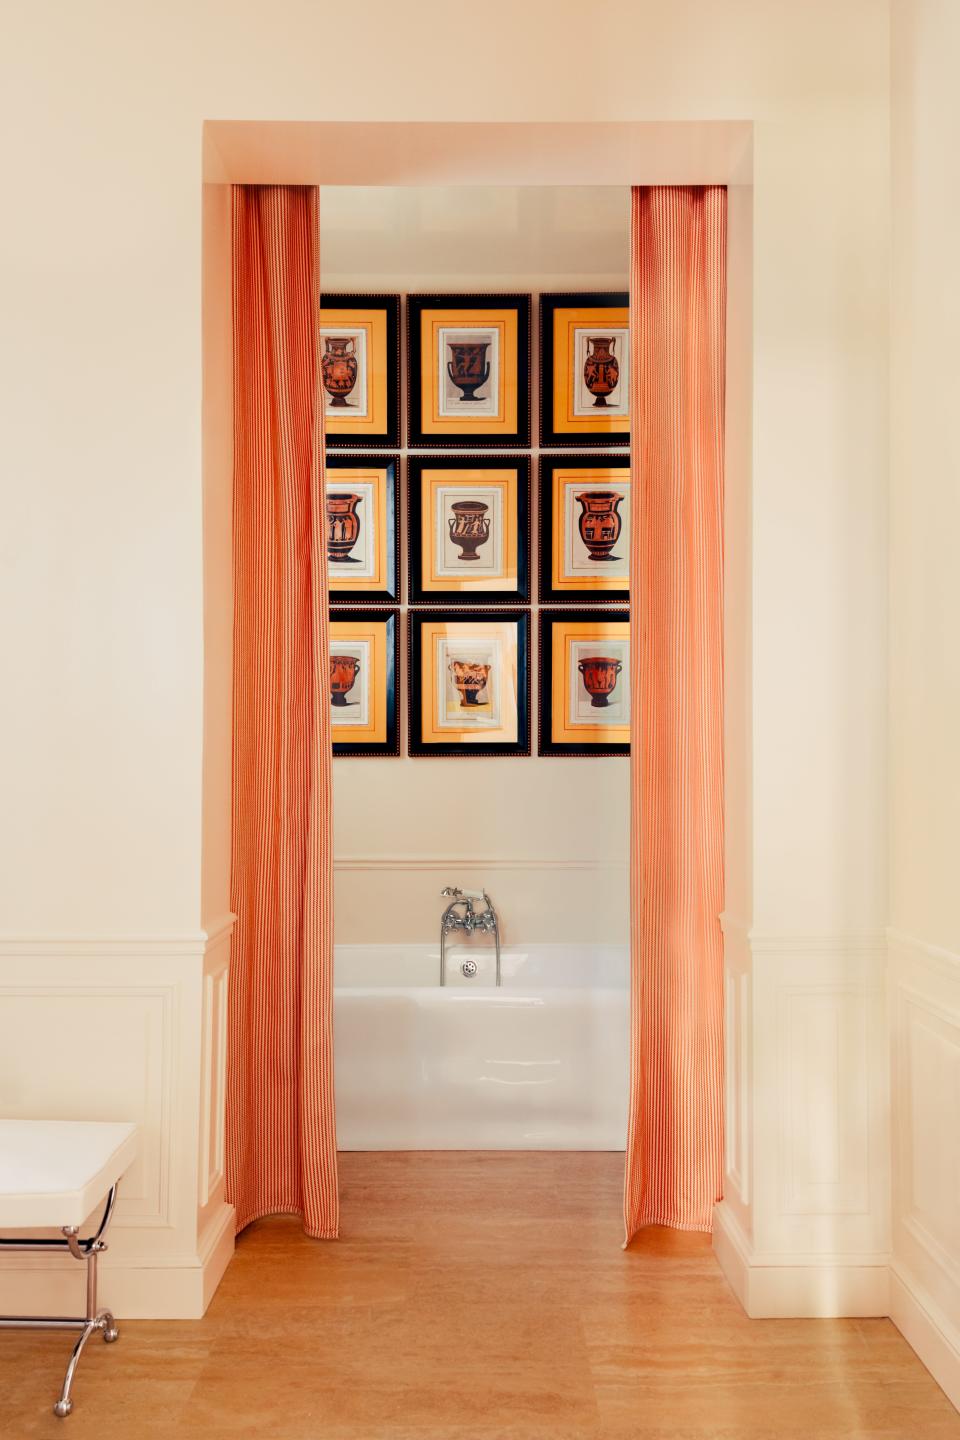 In the master bath, 19th-century prints hang above The Water Monopoly tub. The striped curtains are made of an outdoor fabric by Dedar.